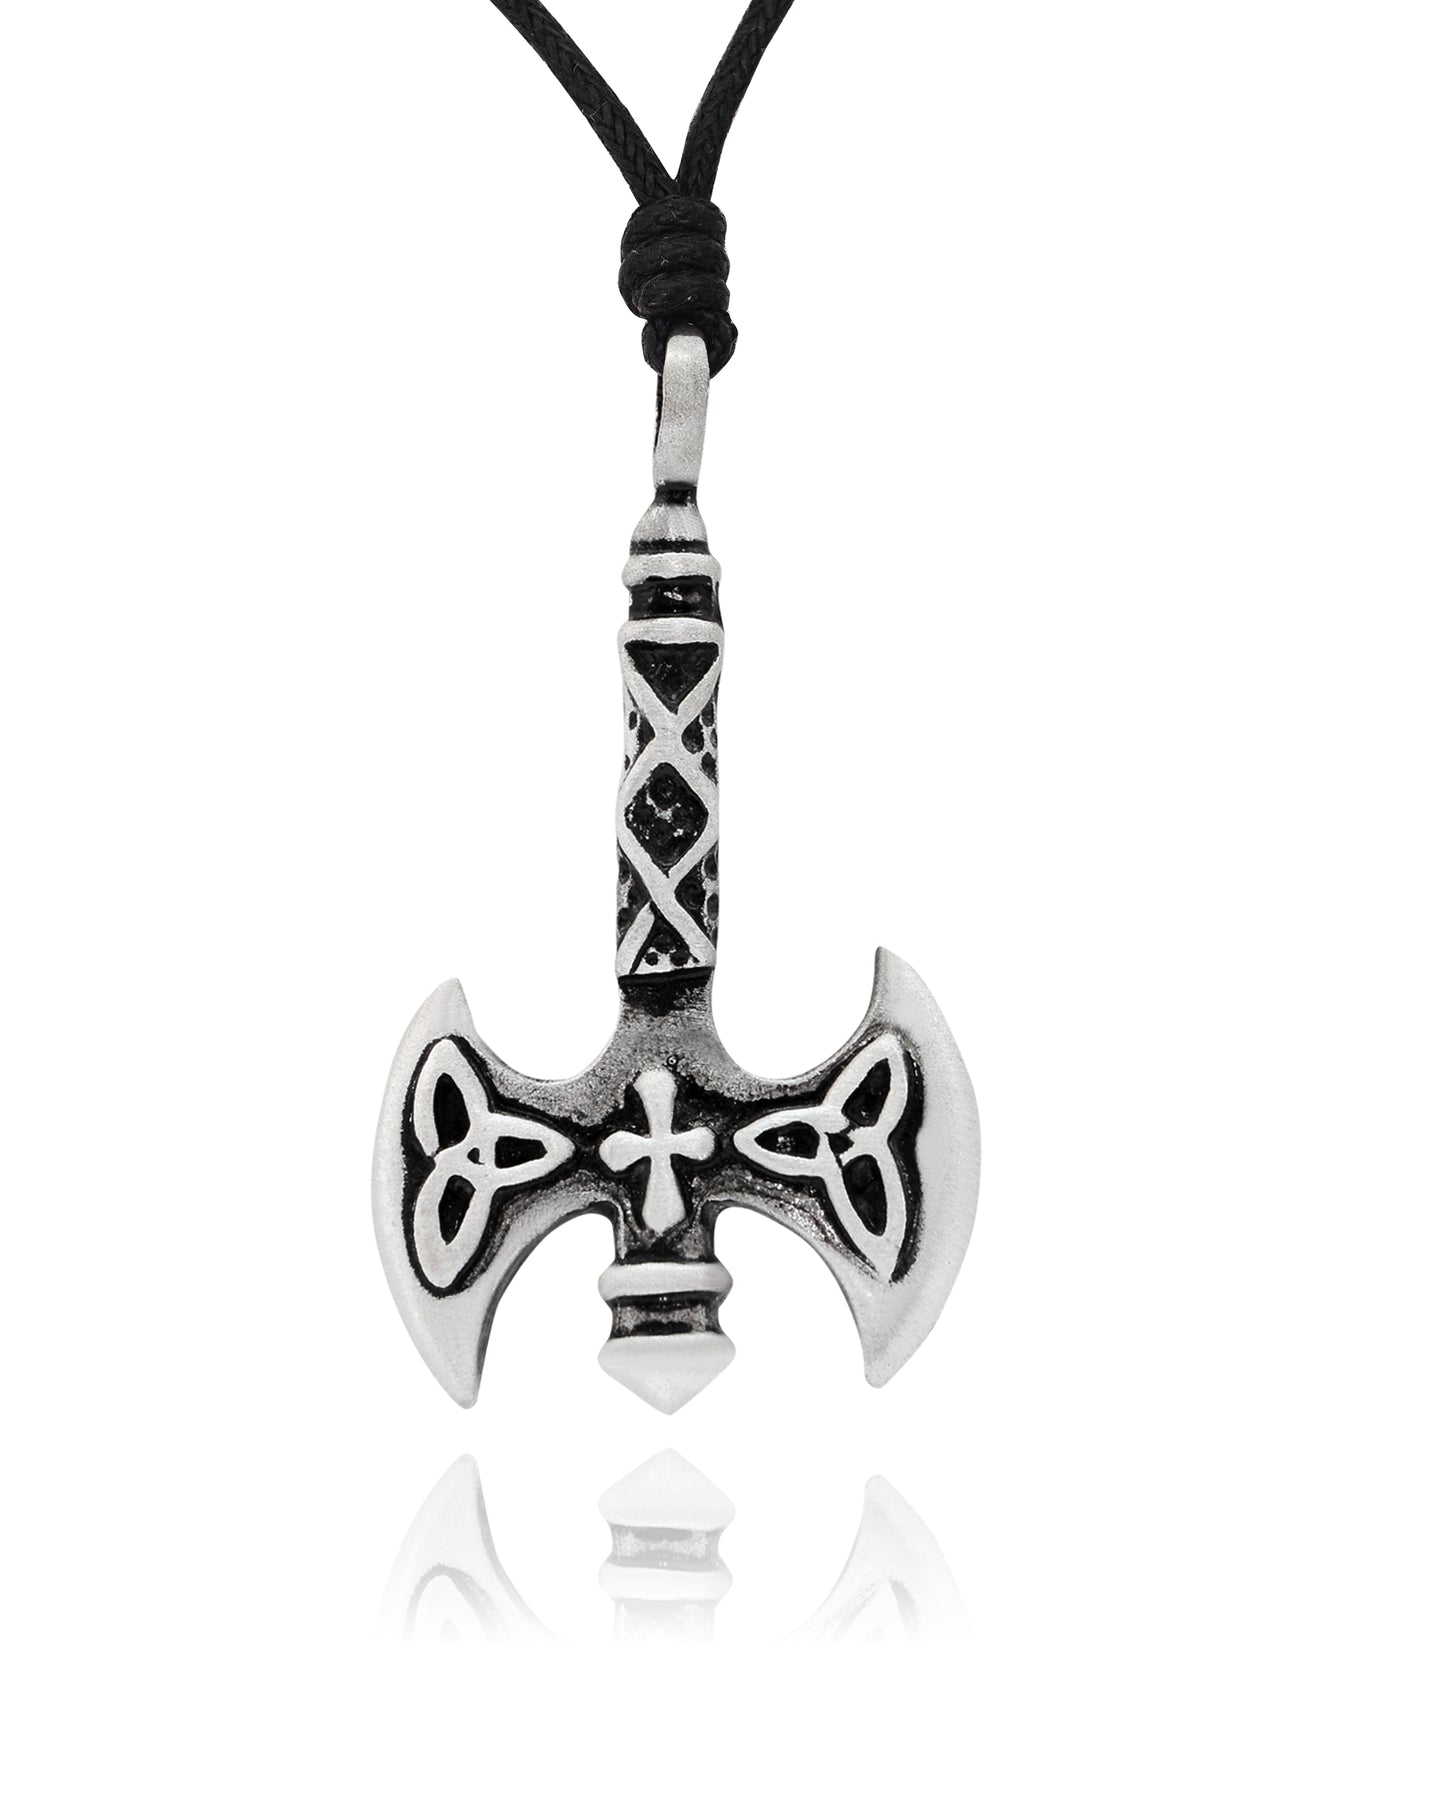 New Battle Axe Silver Pewter Charm Necklace Pendant Jewelry